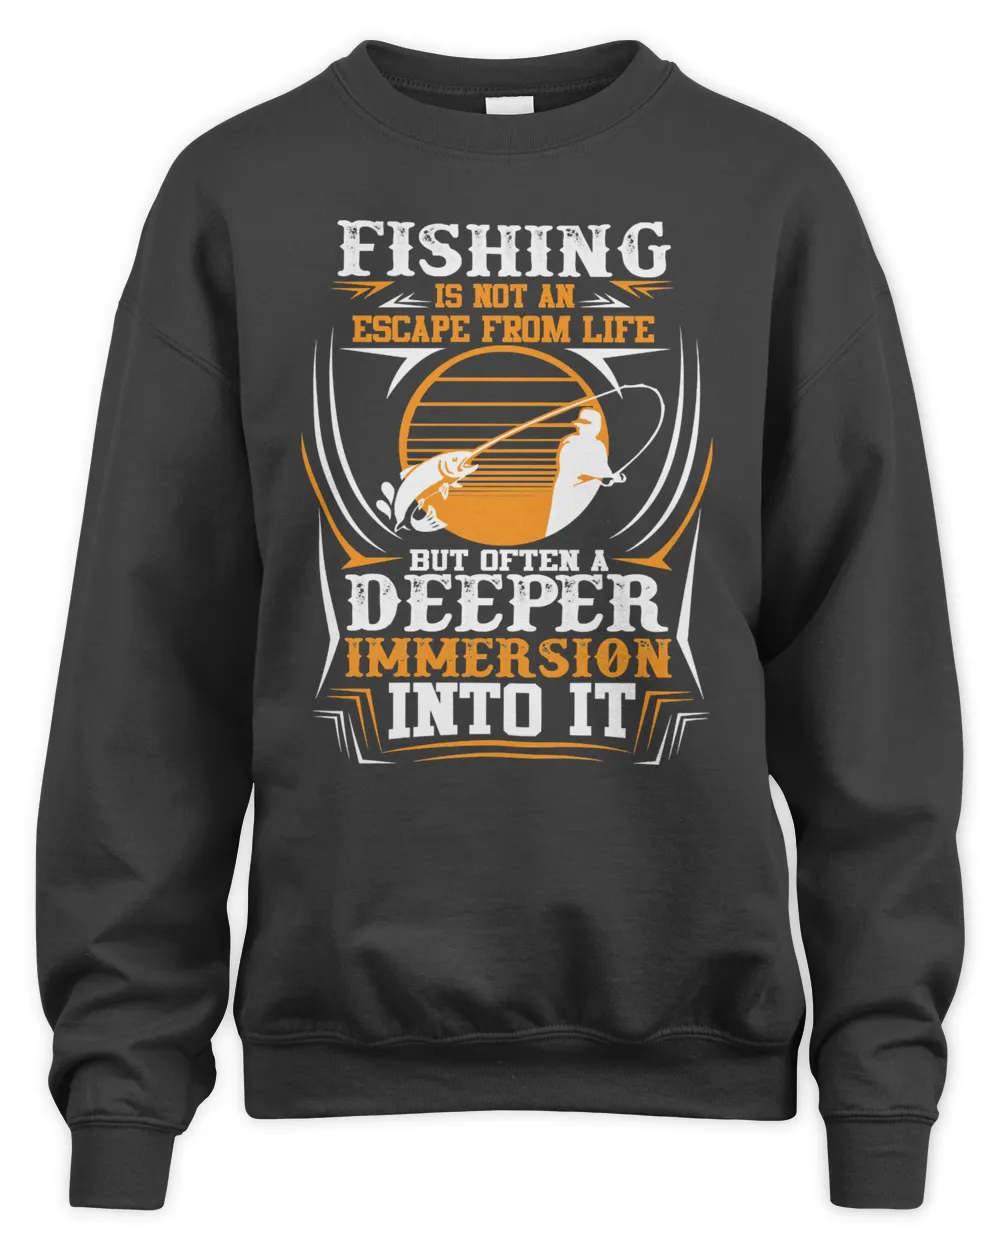 Fishing is not an escape from life but often a deep immersion into it 14 fisher